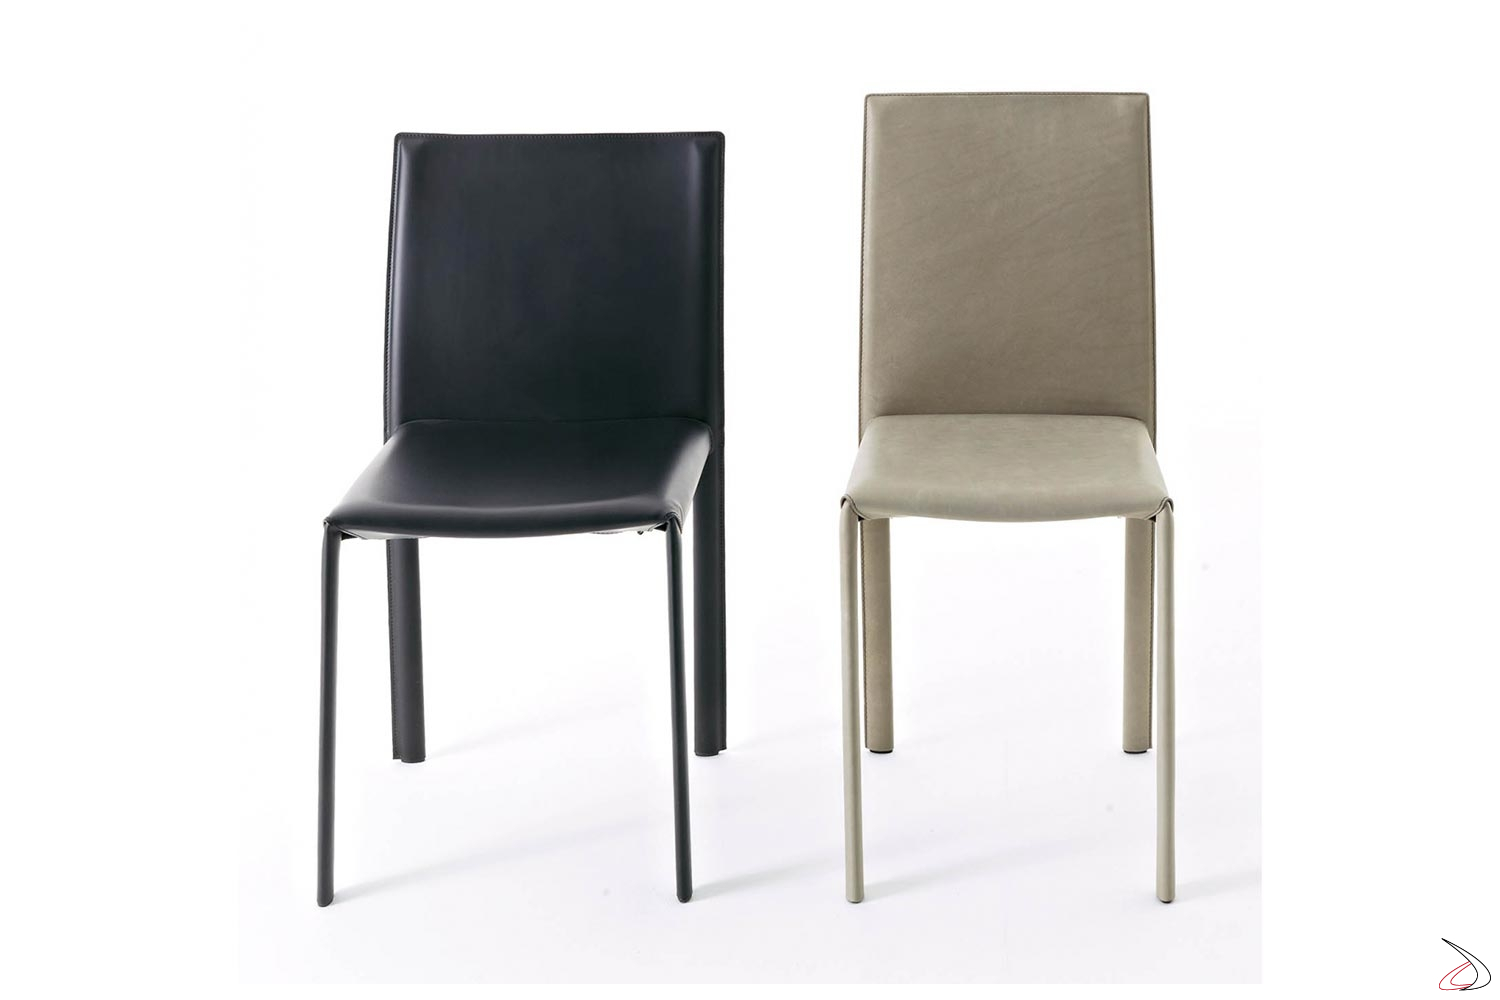 Modern Chair With High Back In Dress Leather Or Leather Toparredi